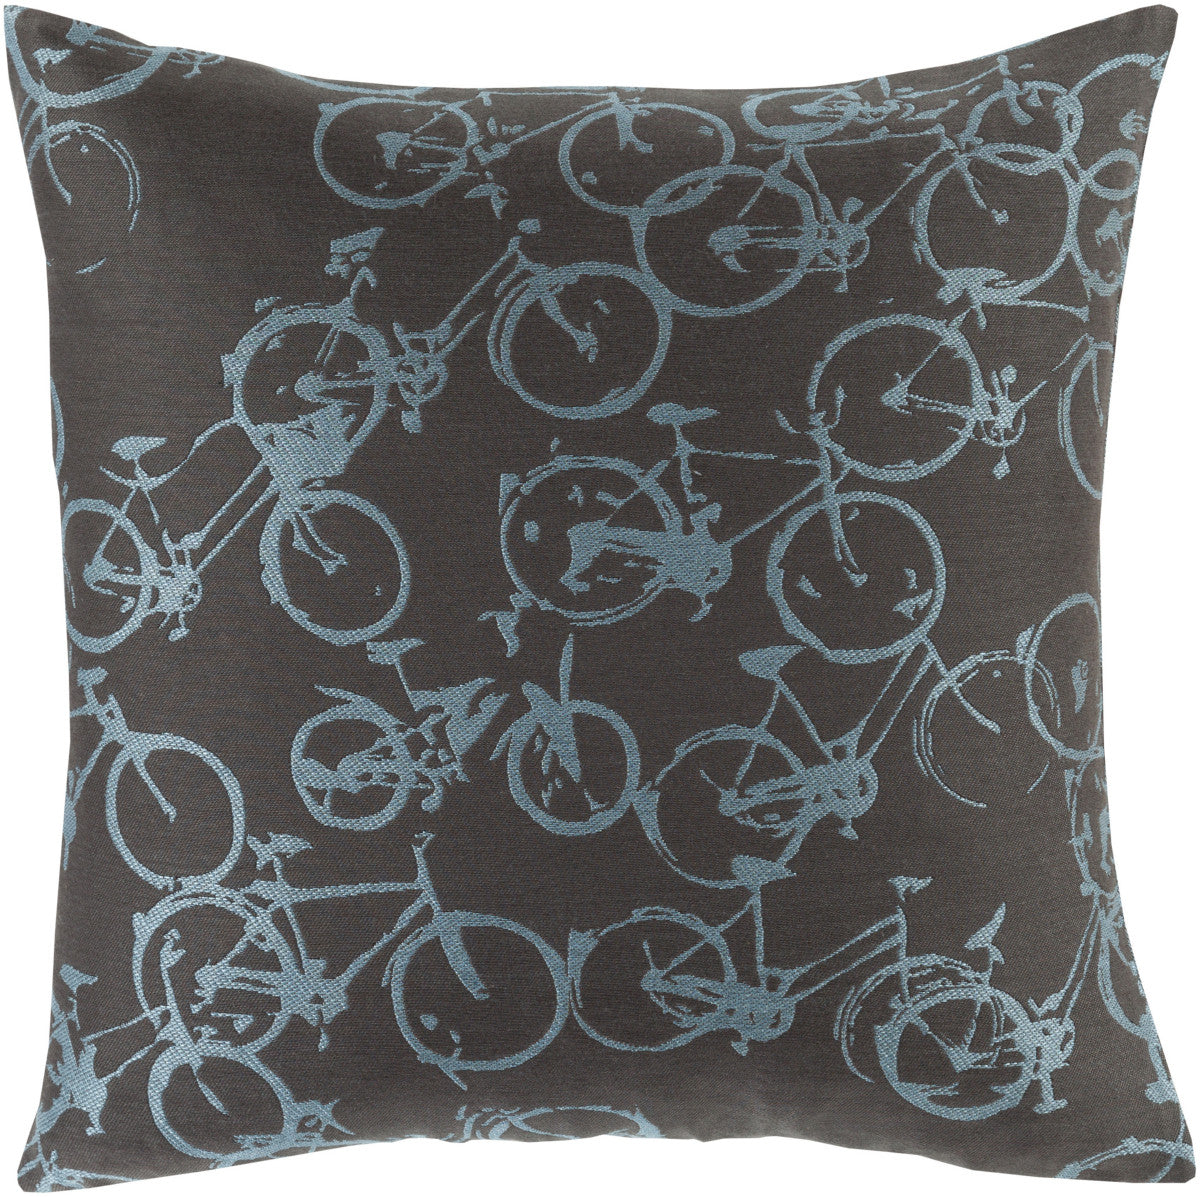 Surya Pedal Power Bold Bicycles PDP-001 Pillow by Mike Farrell main image